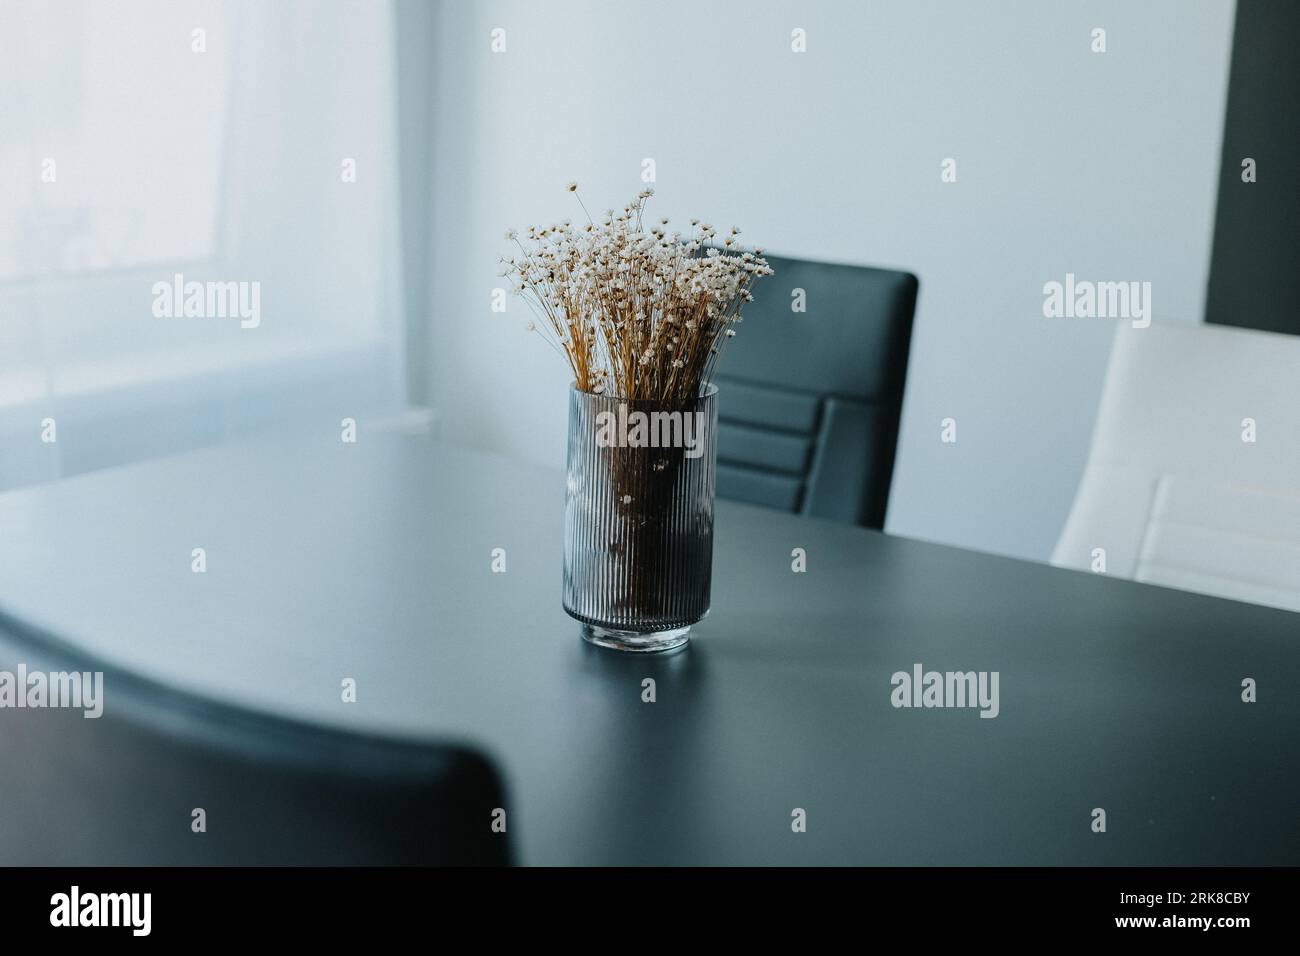 A dining room table featuring an arrangement of dried grasses and assorted flowers in a decorative vase Stock Photo